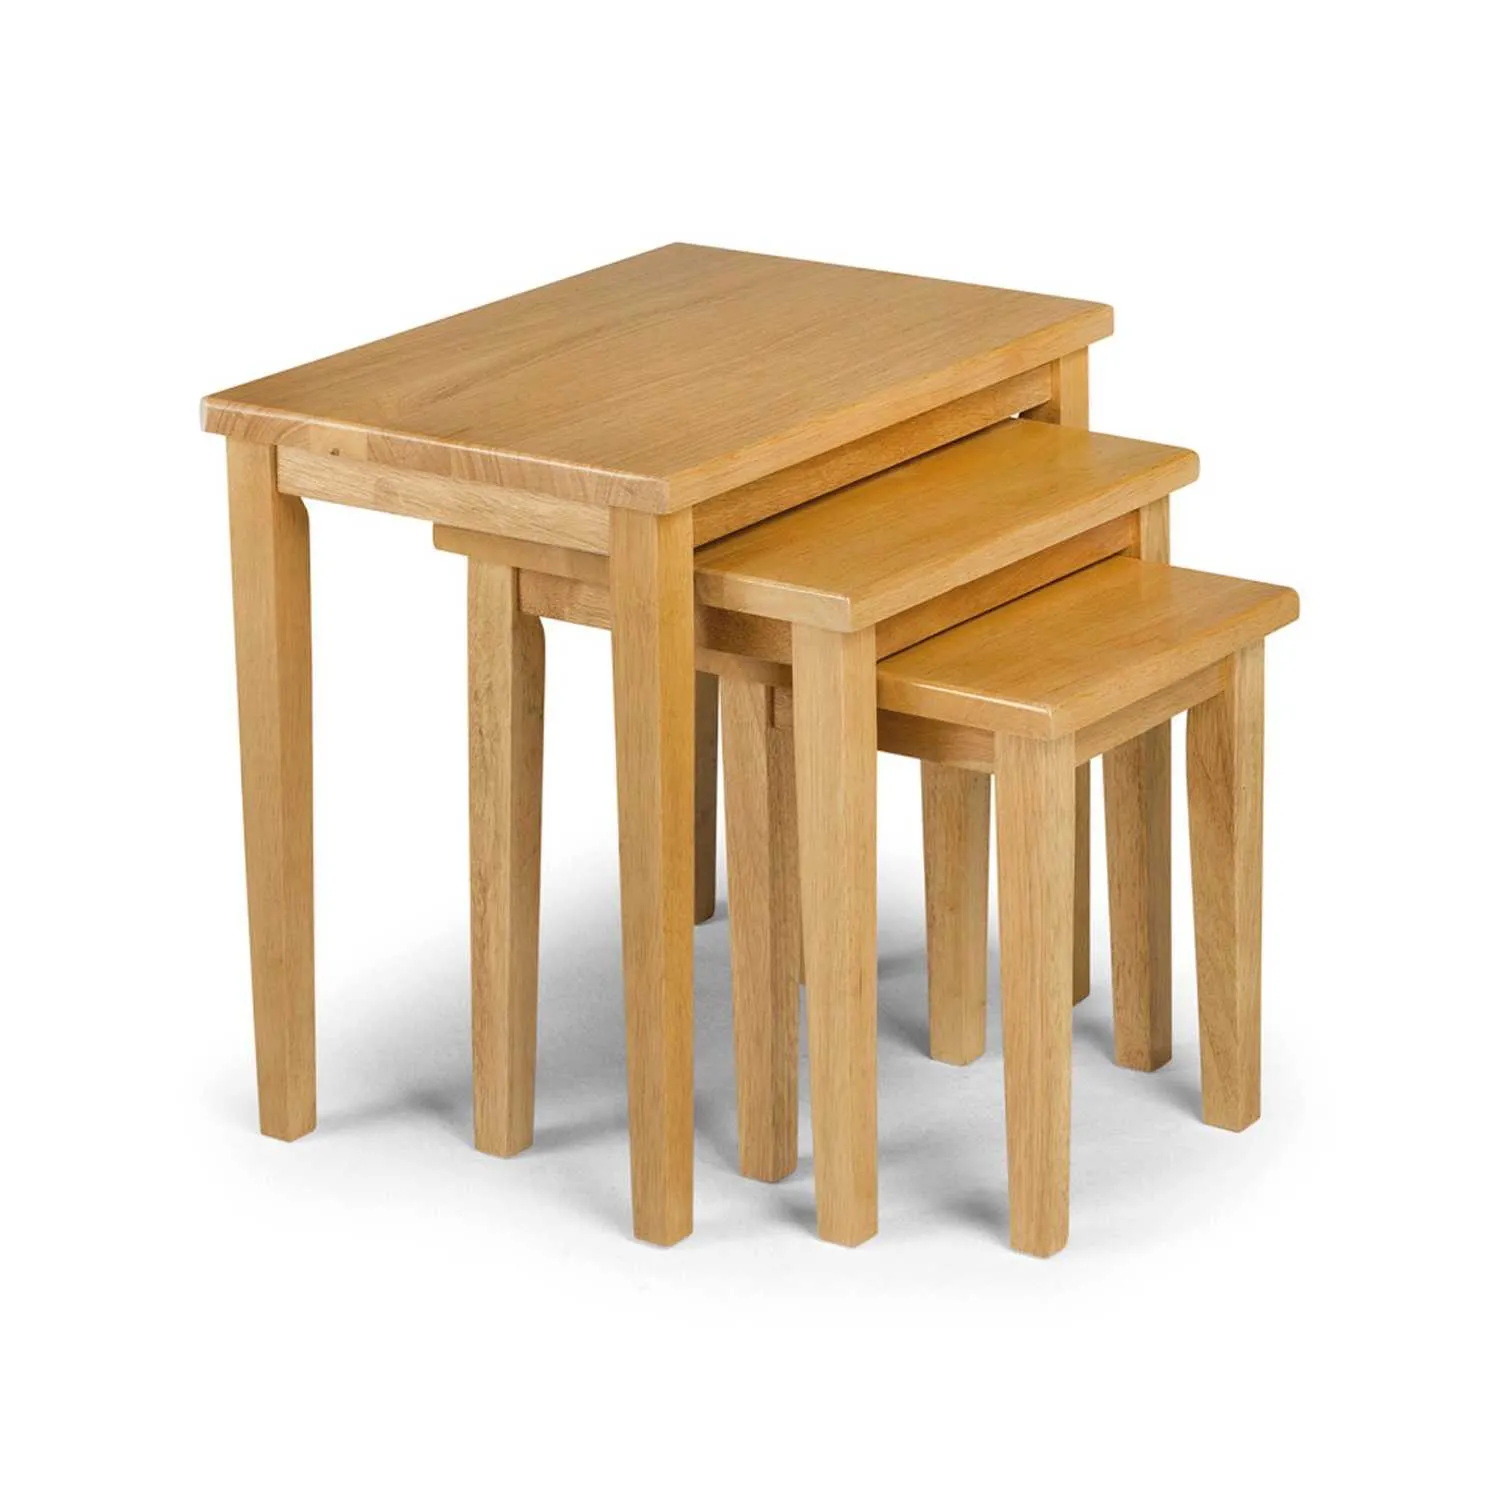 Cleo Nest Of Tables Natural Oak Finish